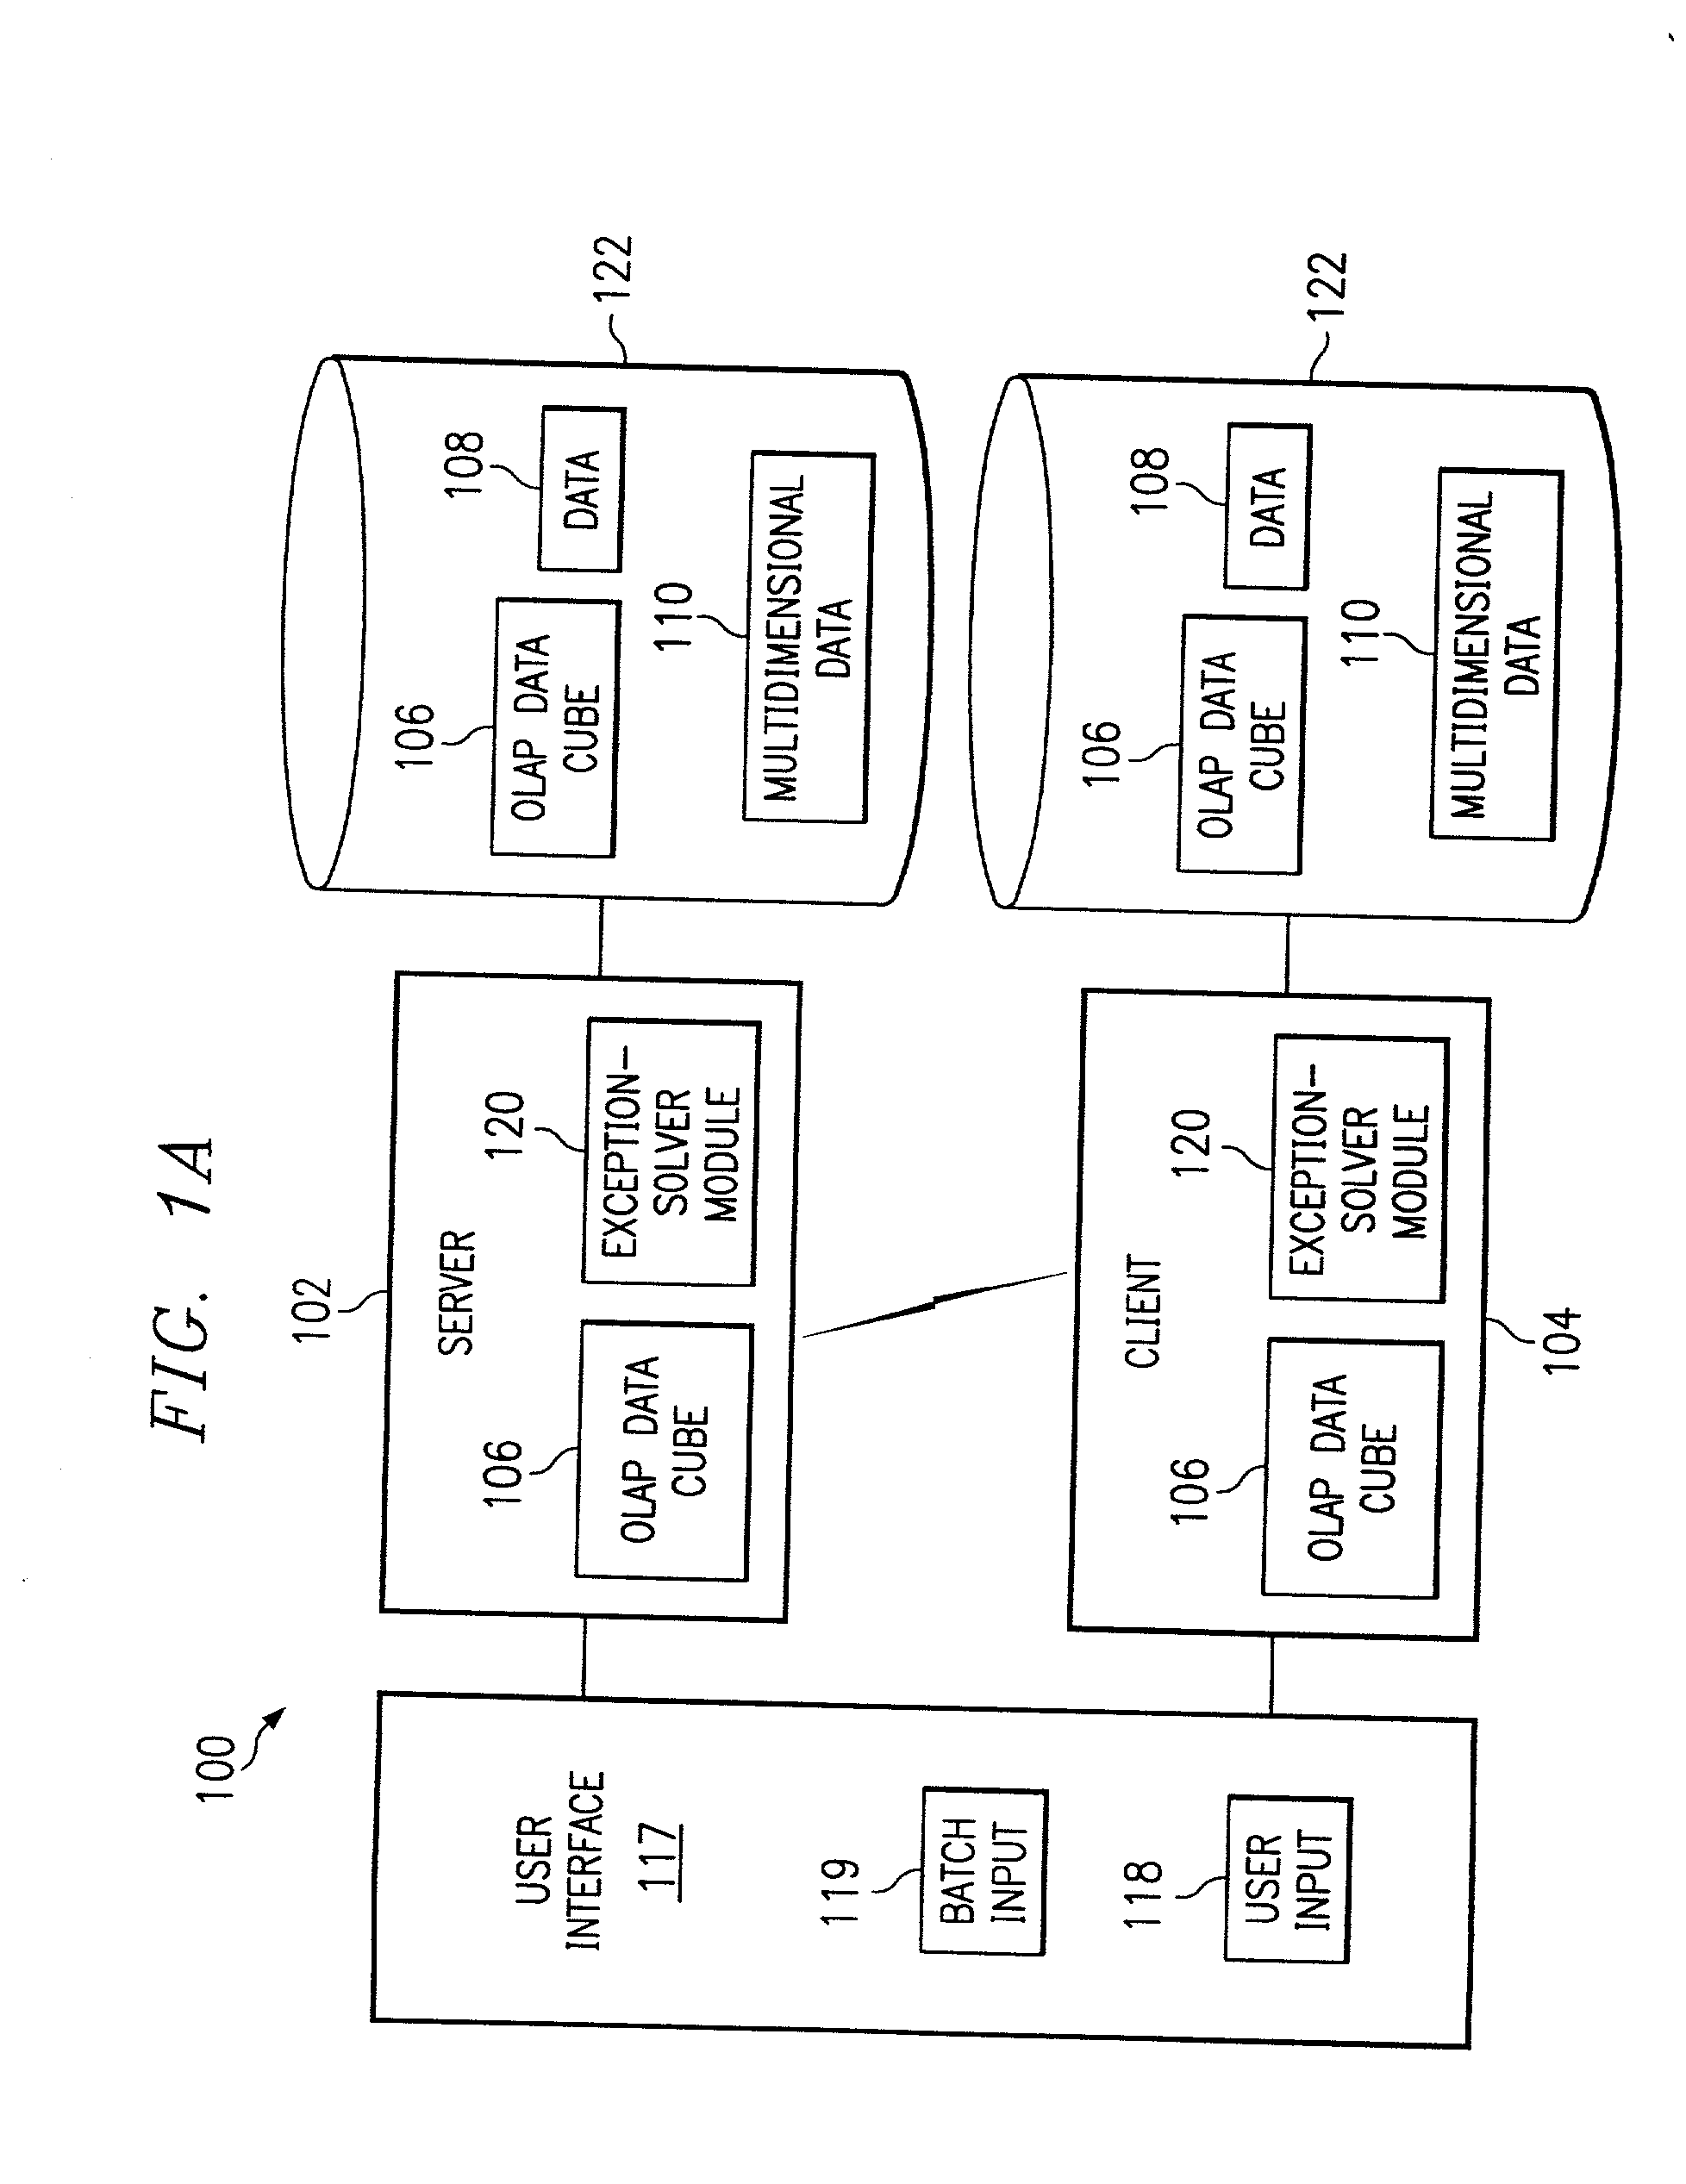 Systems, methods, and computer program products to rank and explain dimensions associated with exceptions in multidimensional data